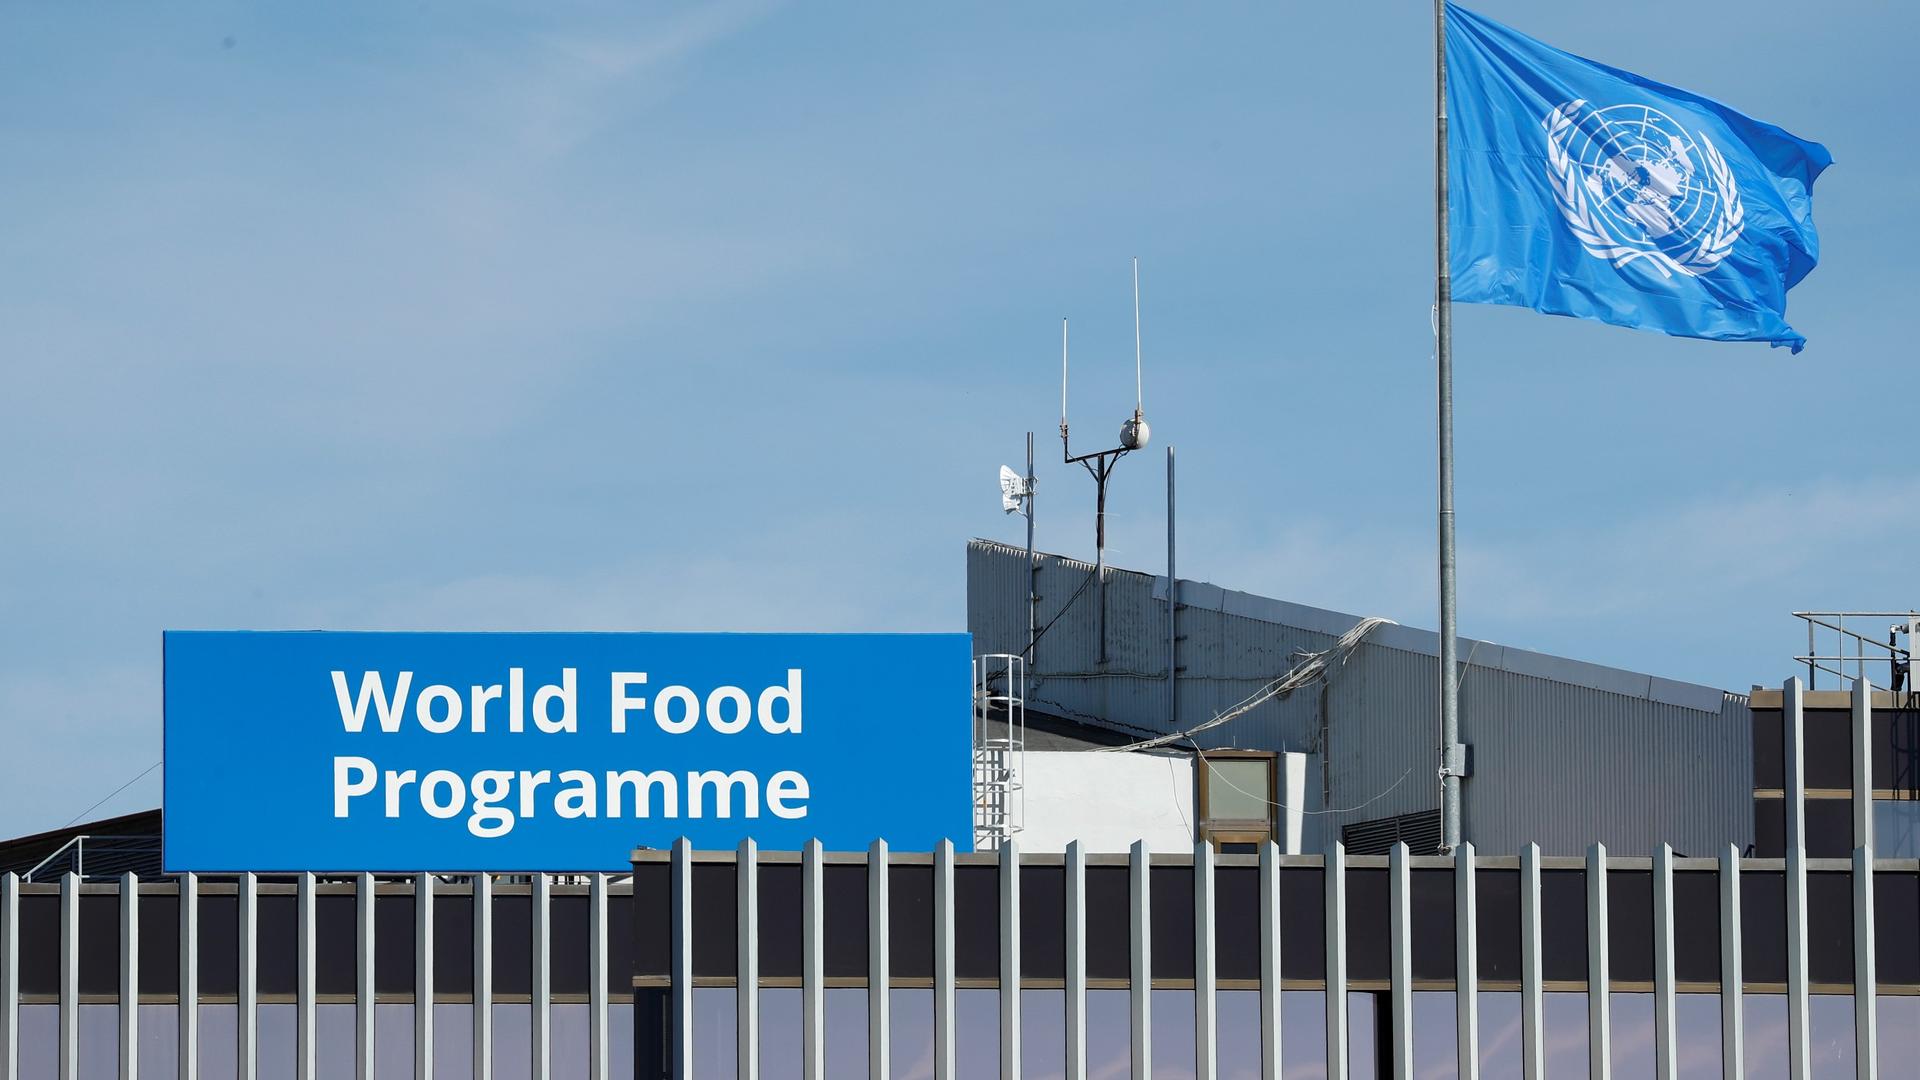 The World Food Program's flag flutters on the roof of WFP headquaters after the organization won the 2020 Nobel Peace Prize, in Rome, Italy, Oct. 9, 2020.